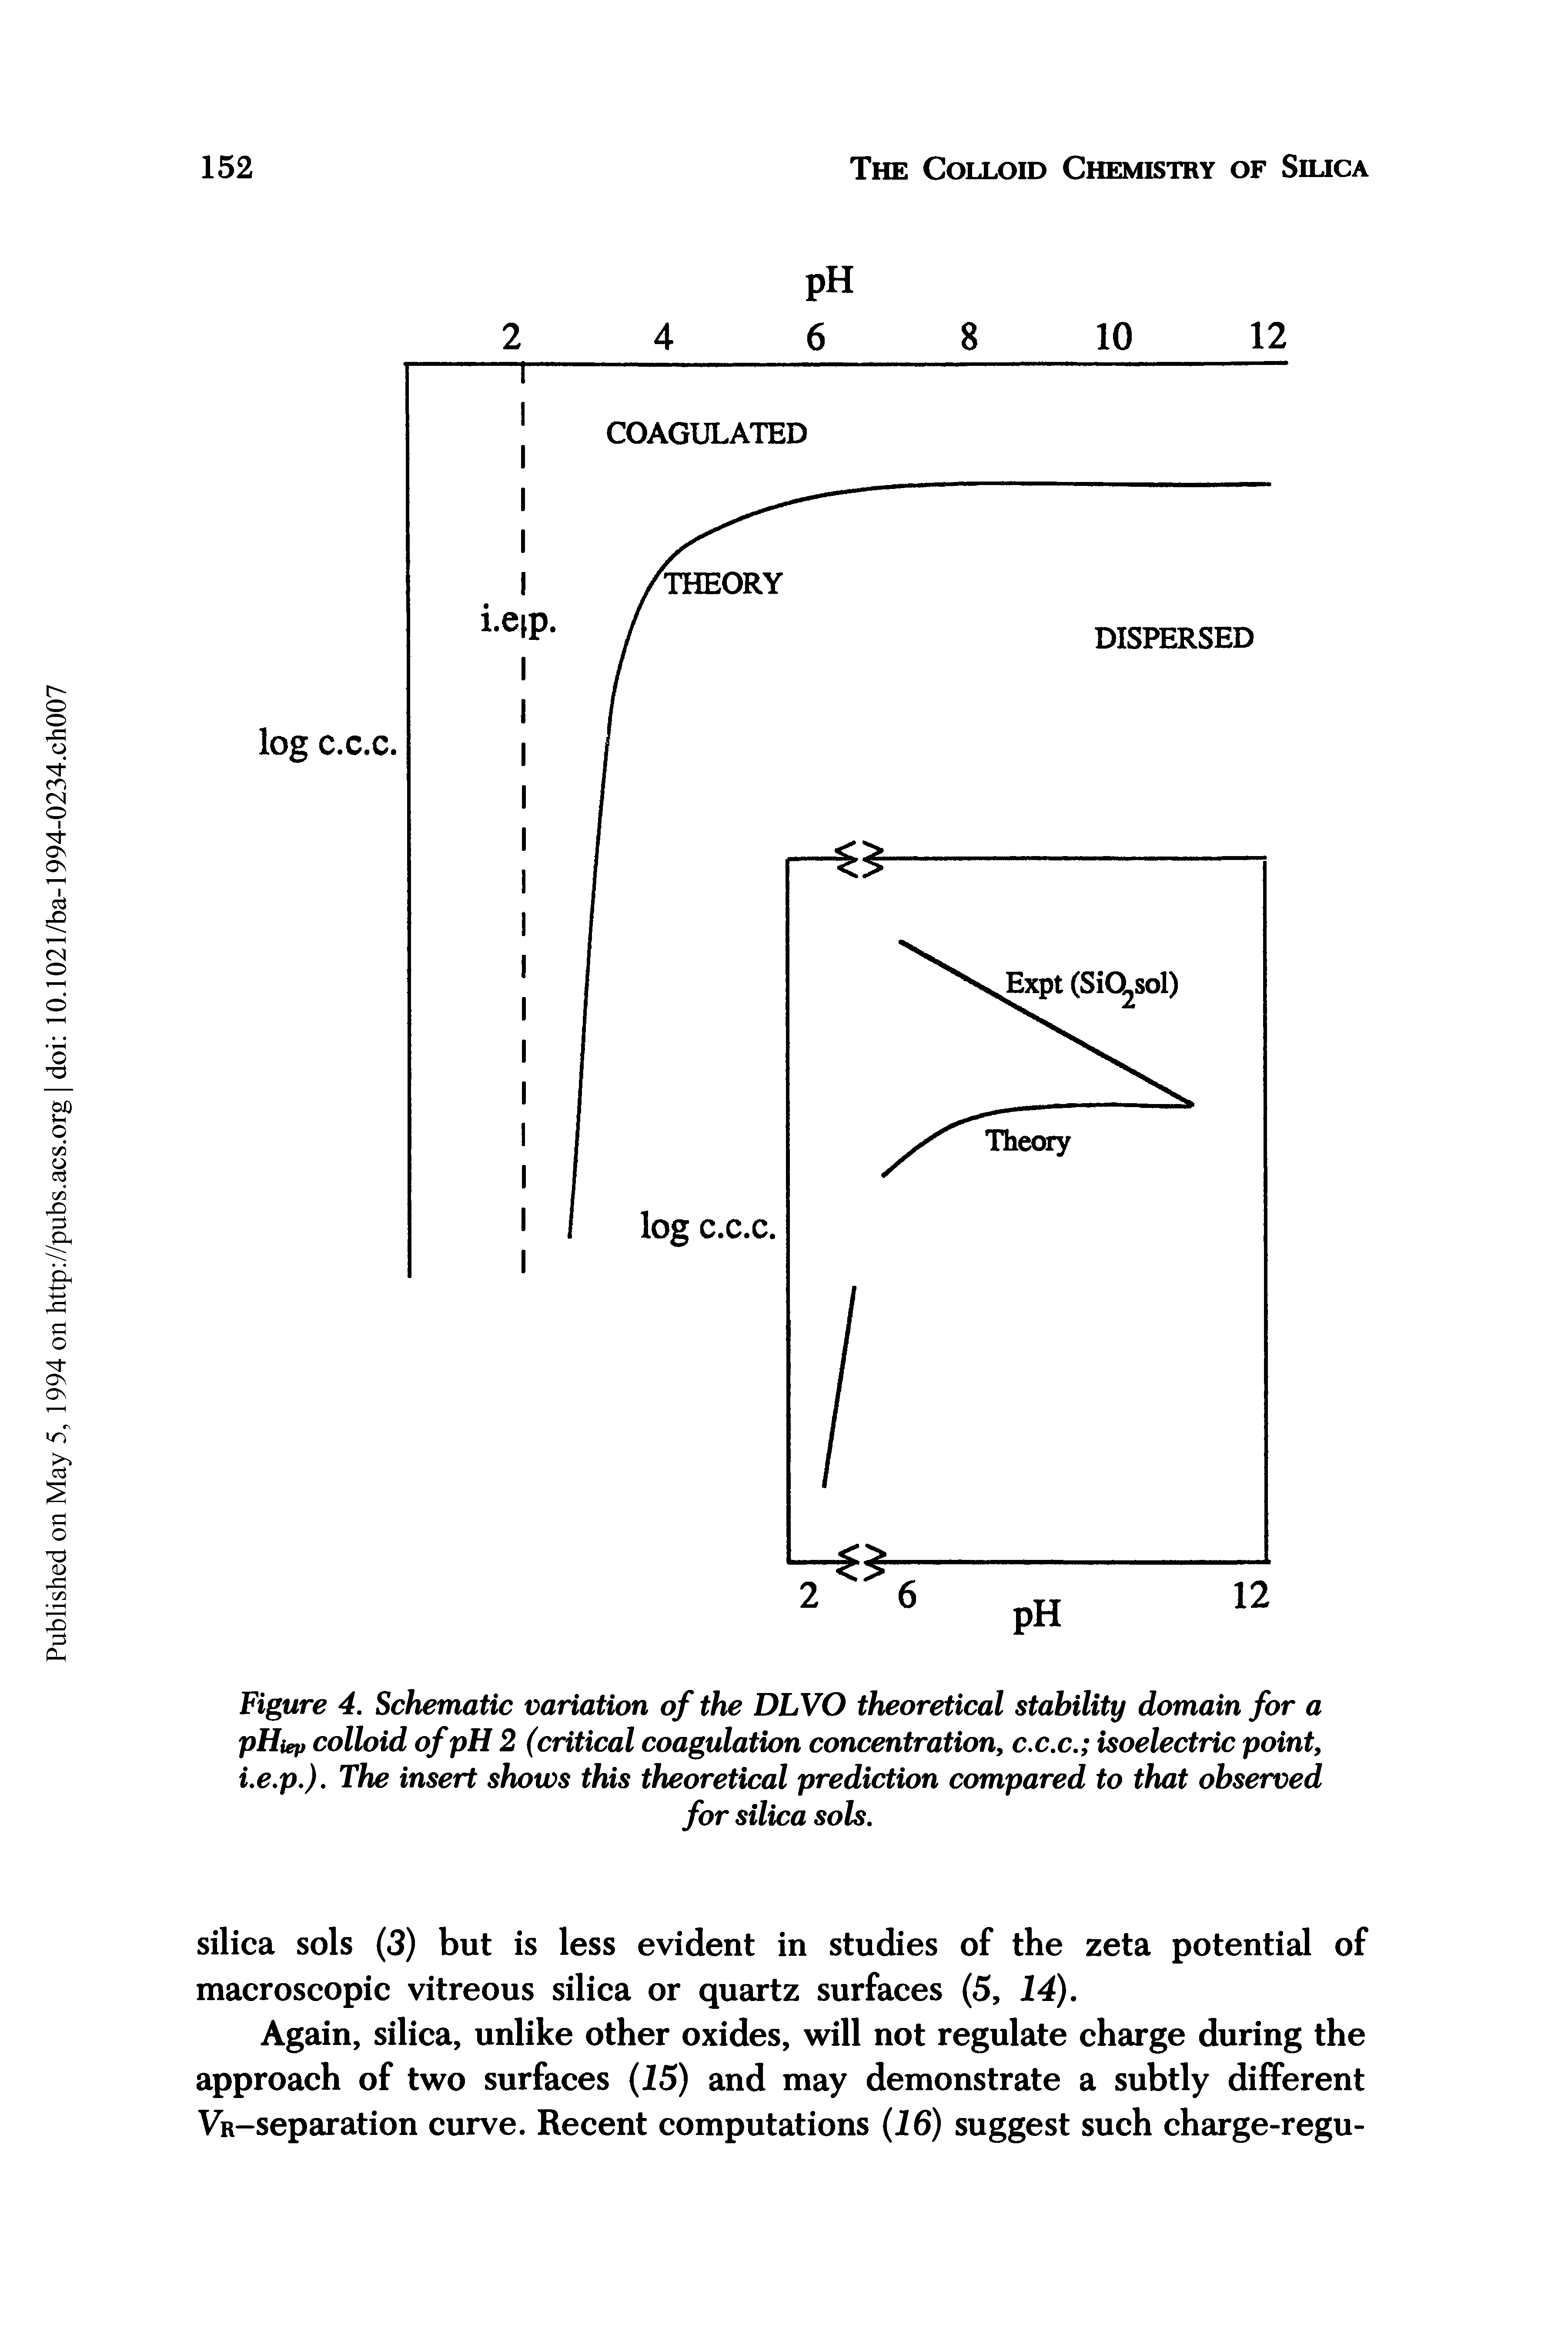 Figure 4. Schematic variation of the DLVO theoretical stability domain for a pHiep colloid of pH 2 (critical coagulation concentration, c.c.c. isoelectric point, i.e.p.). The insert shows this theoretical prediction compared to that observed...